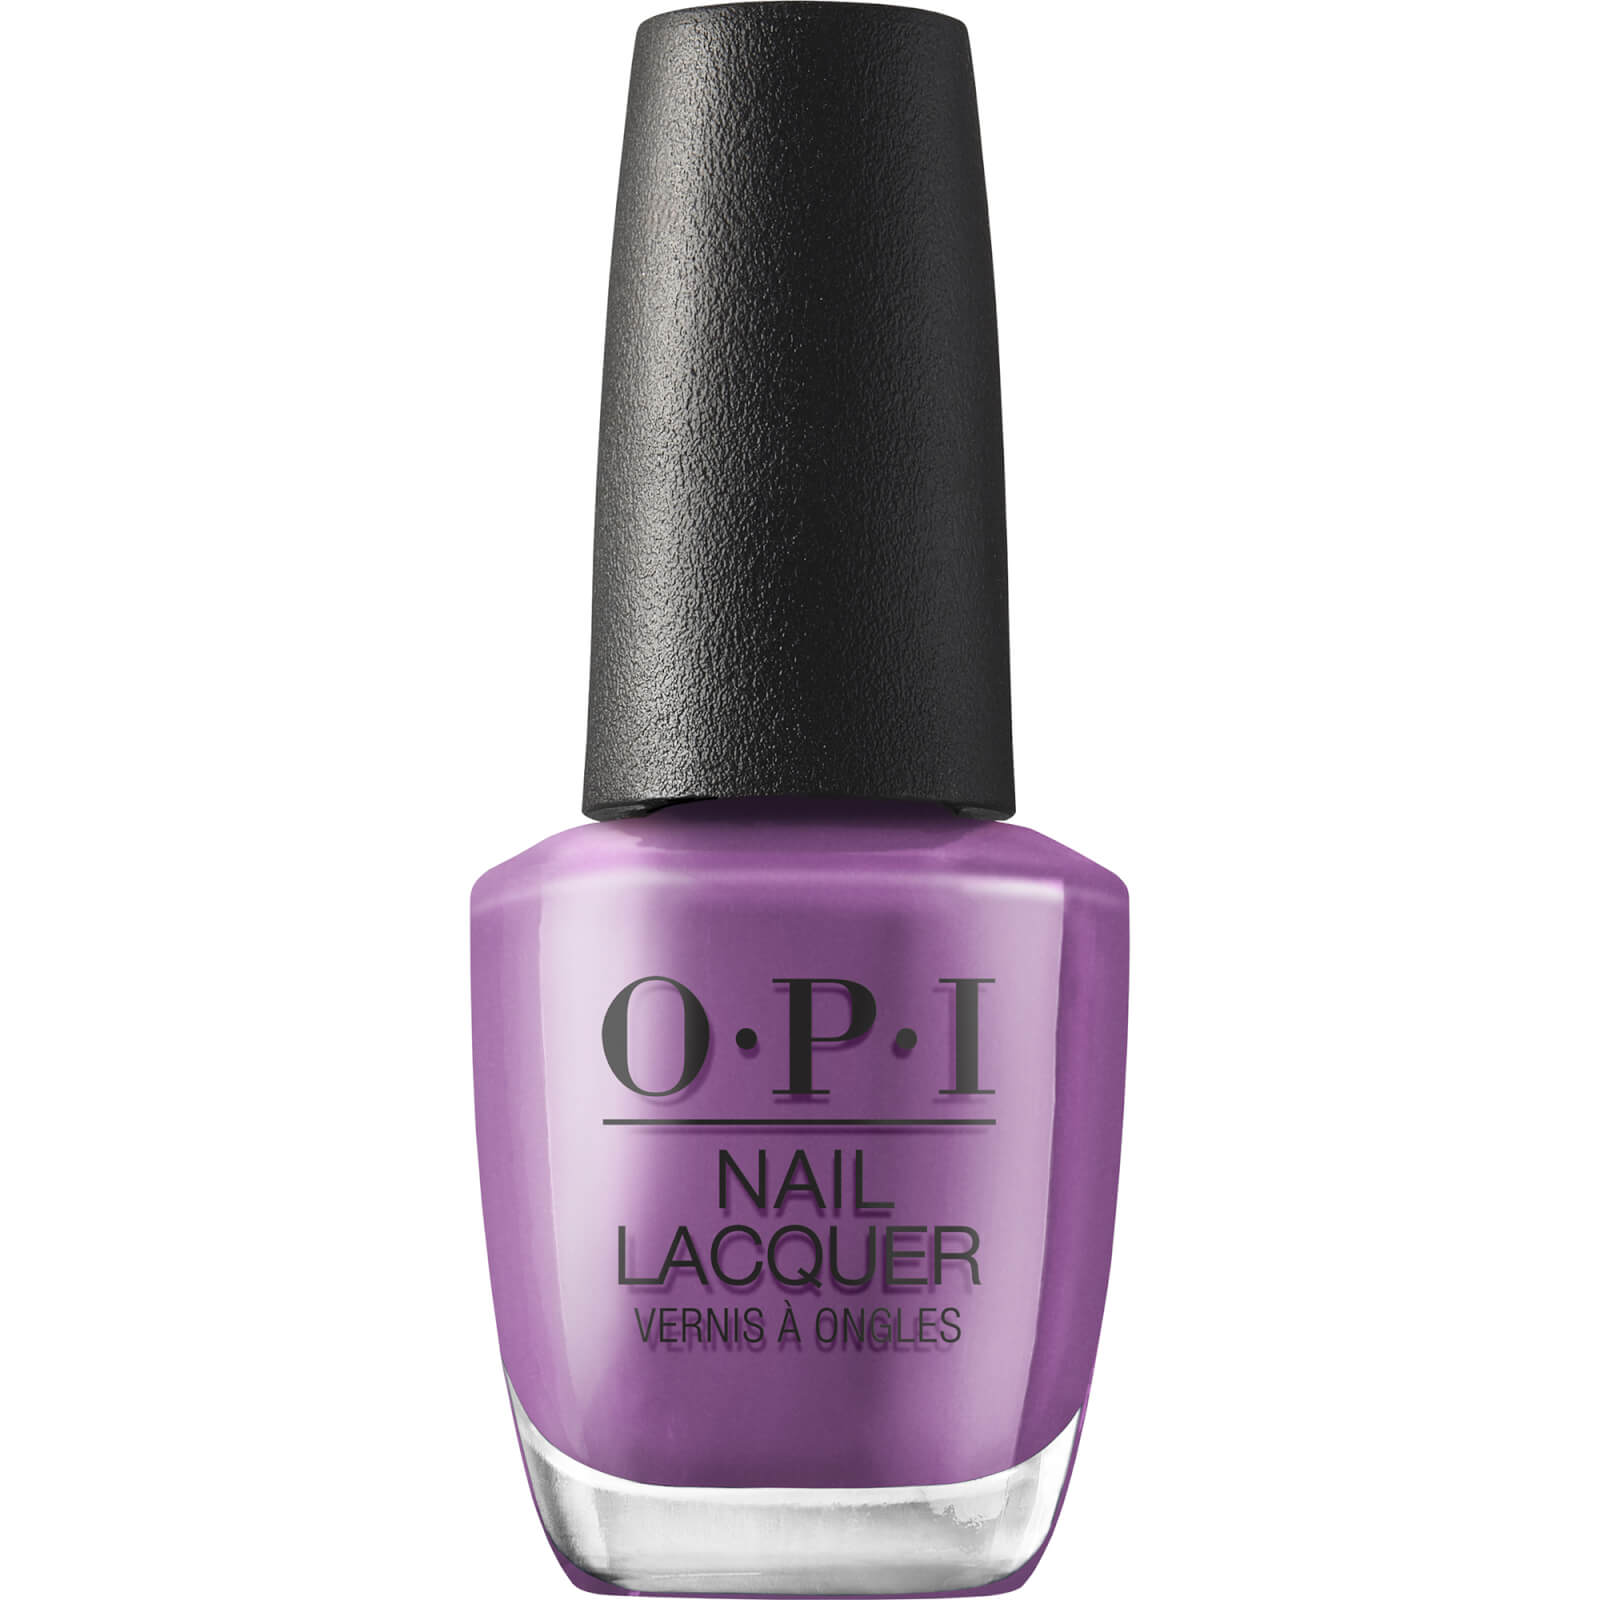 OPI Fall Wonders Collection Nail Polish 15ml (Various Shades) - Medi-take It All In